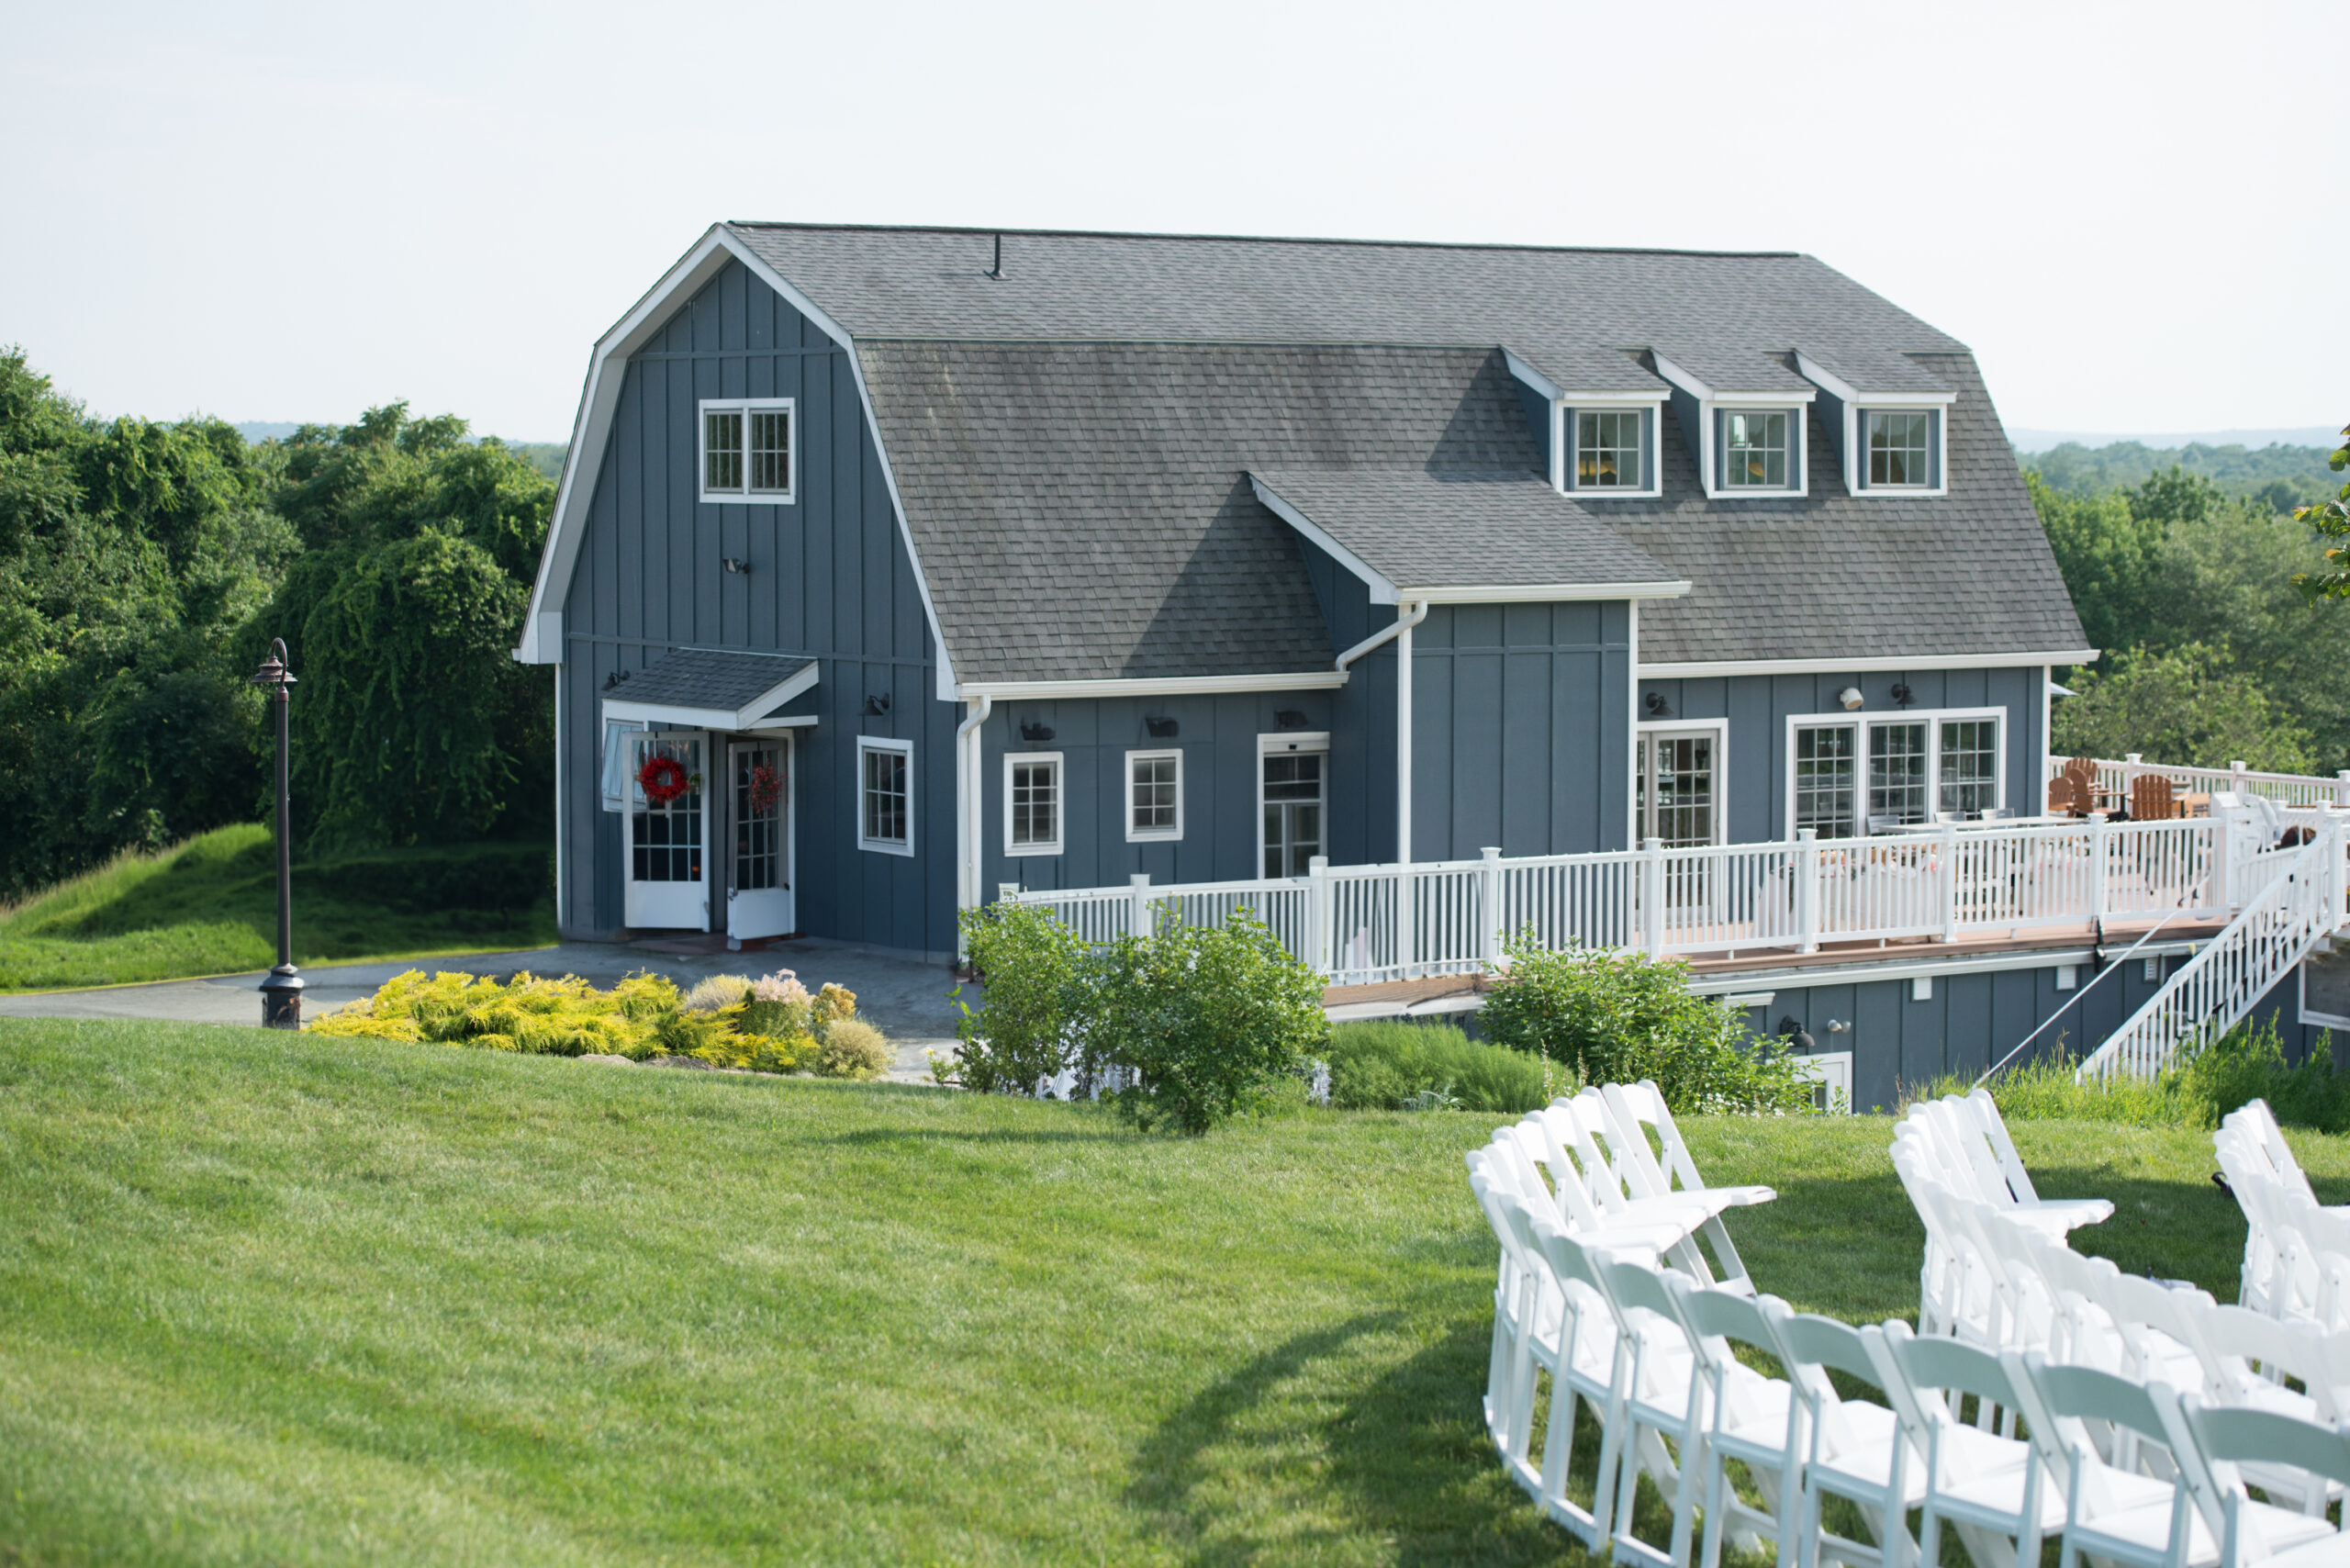 The Tasting Barn and the adjacent deck offer a quintessential backdrop to the outdoor ceremony space at Preston Ridge Vineyard.